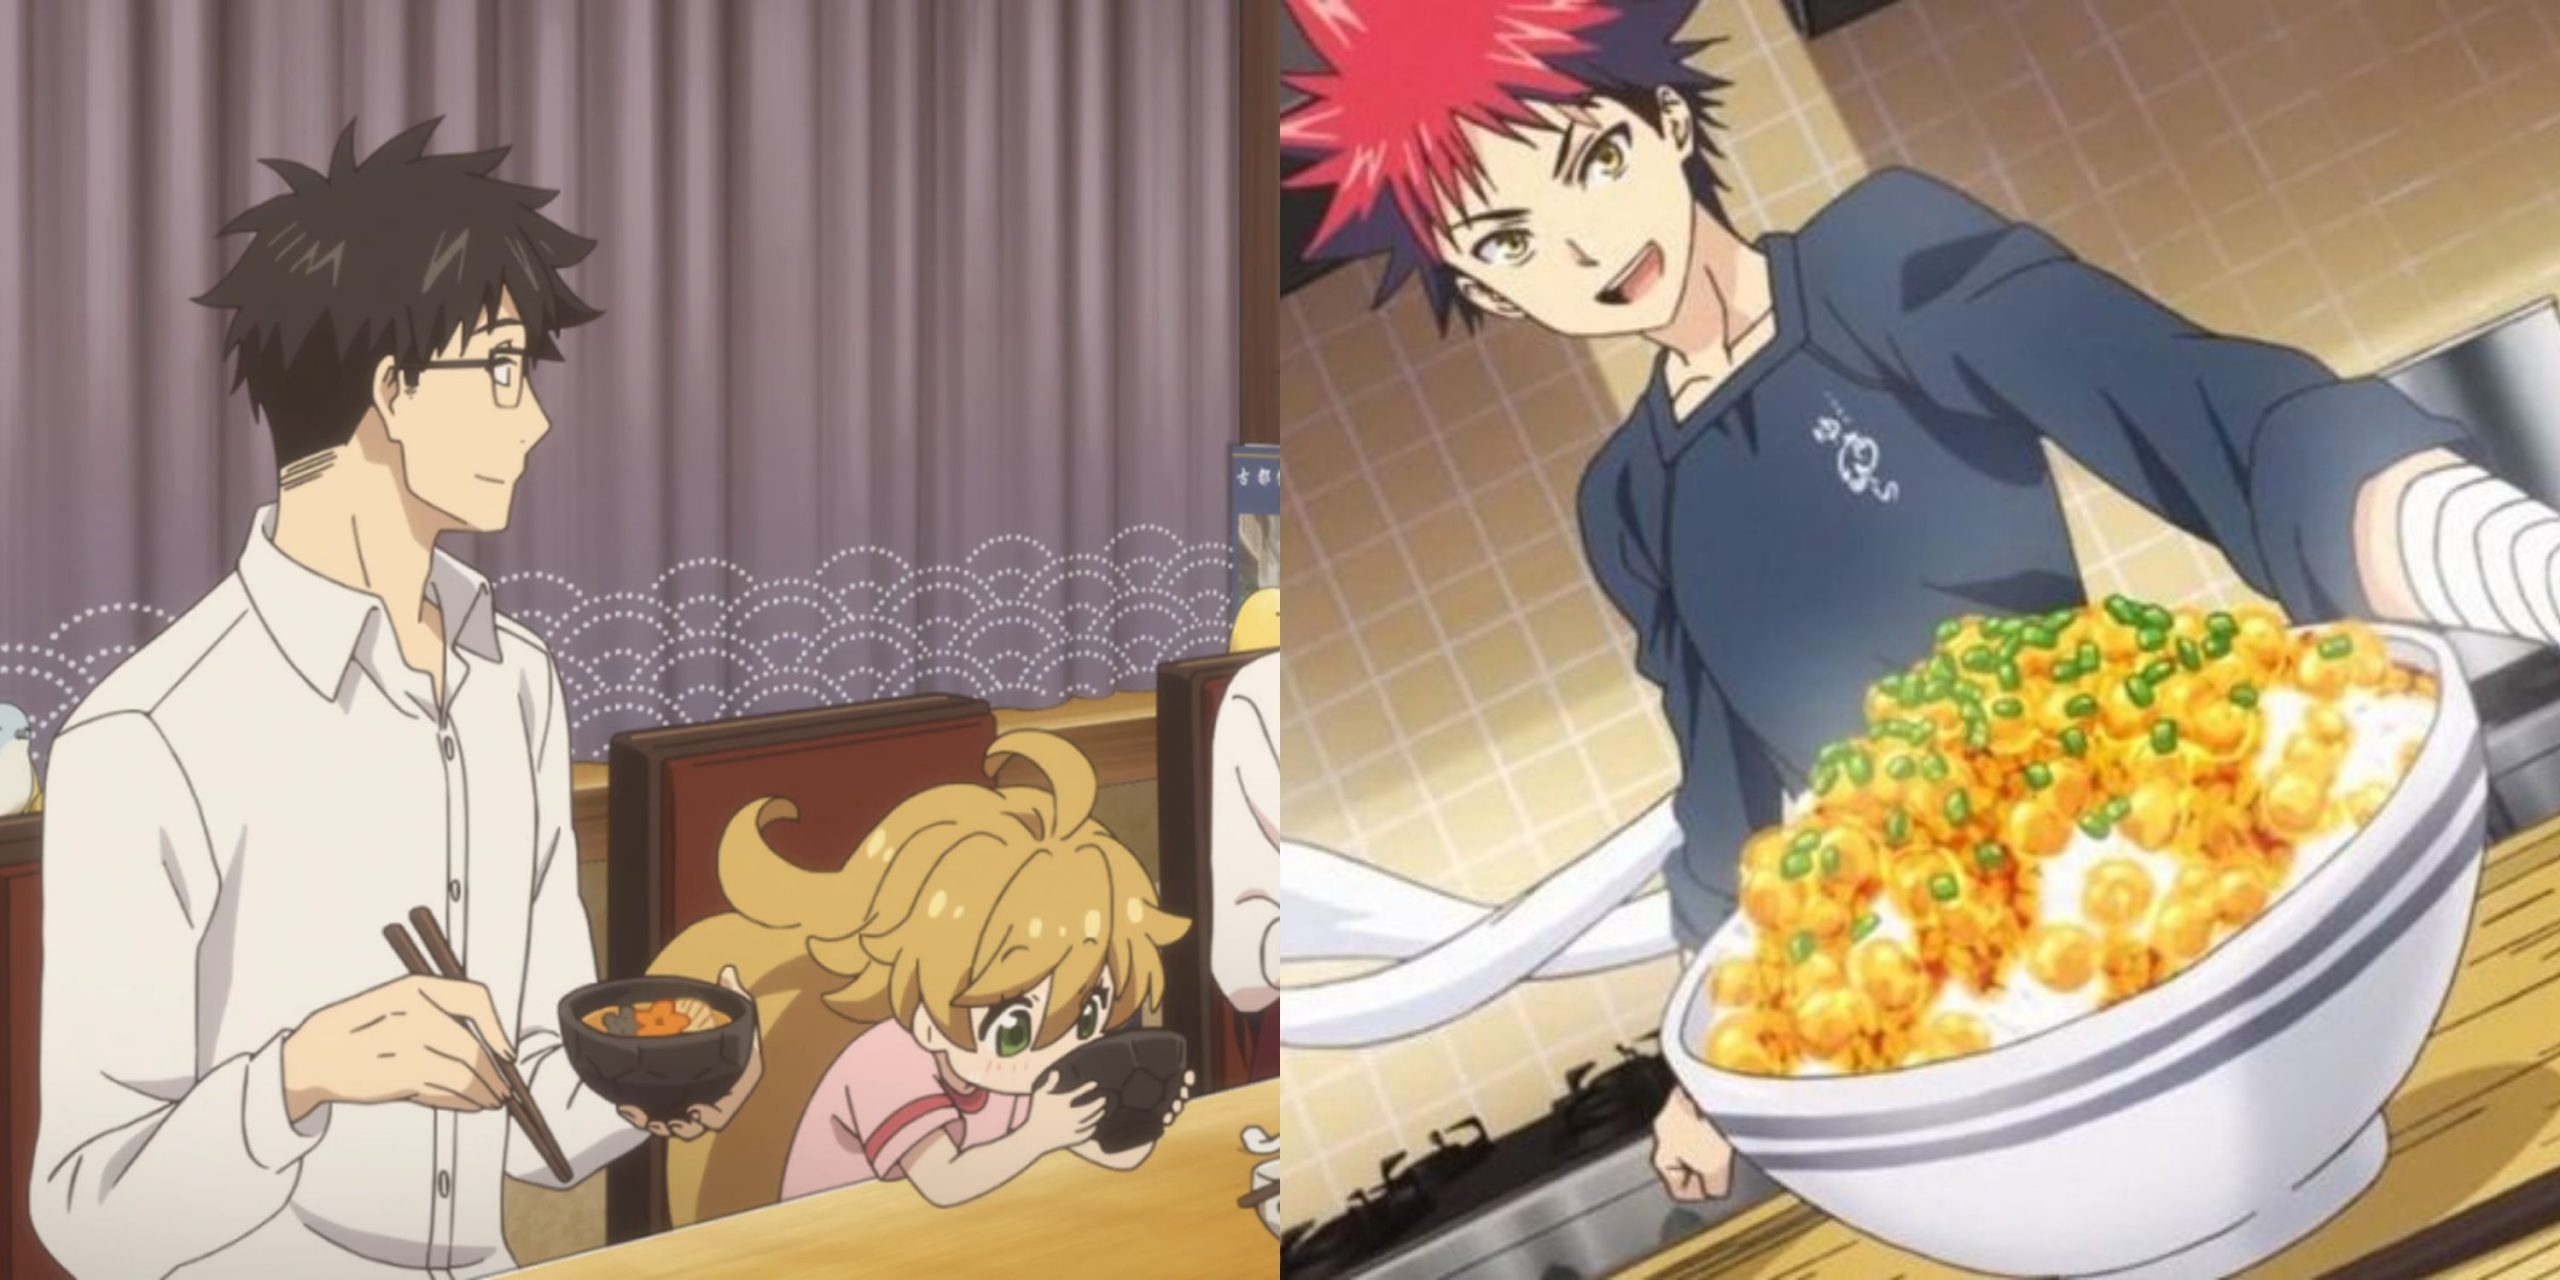 Featured image split the family eating in Sweetness and Lightning and Soma presenting food in Food Wars